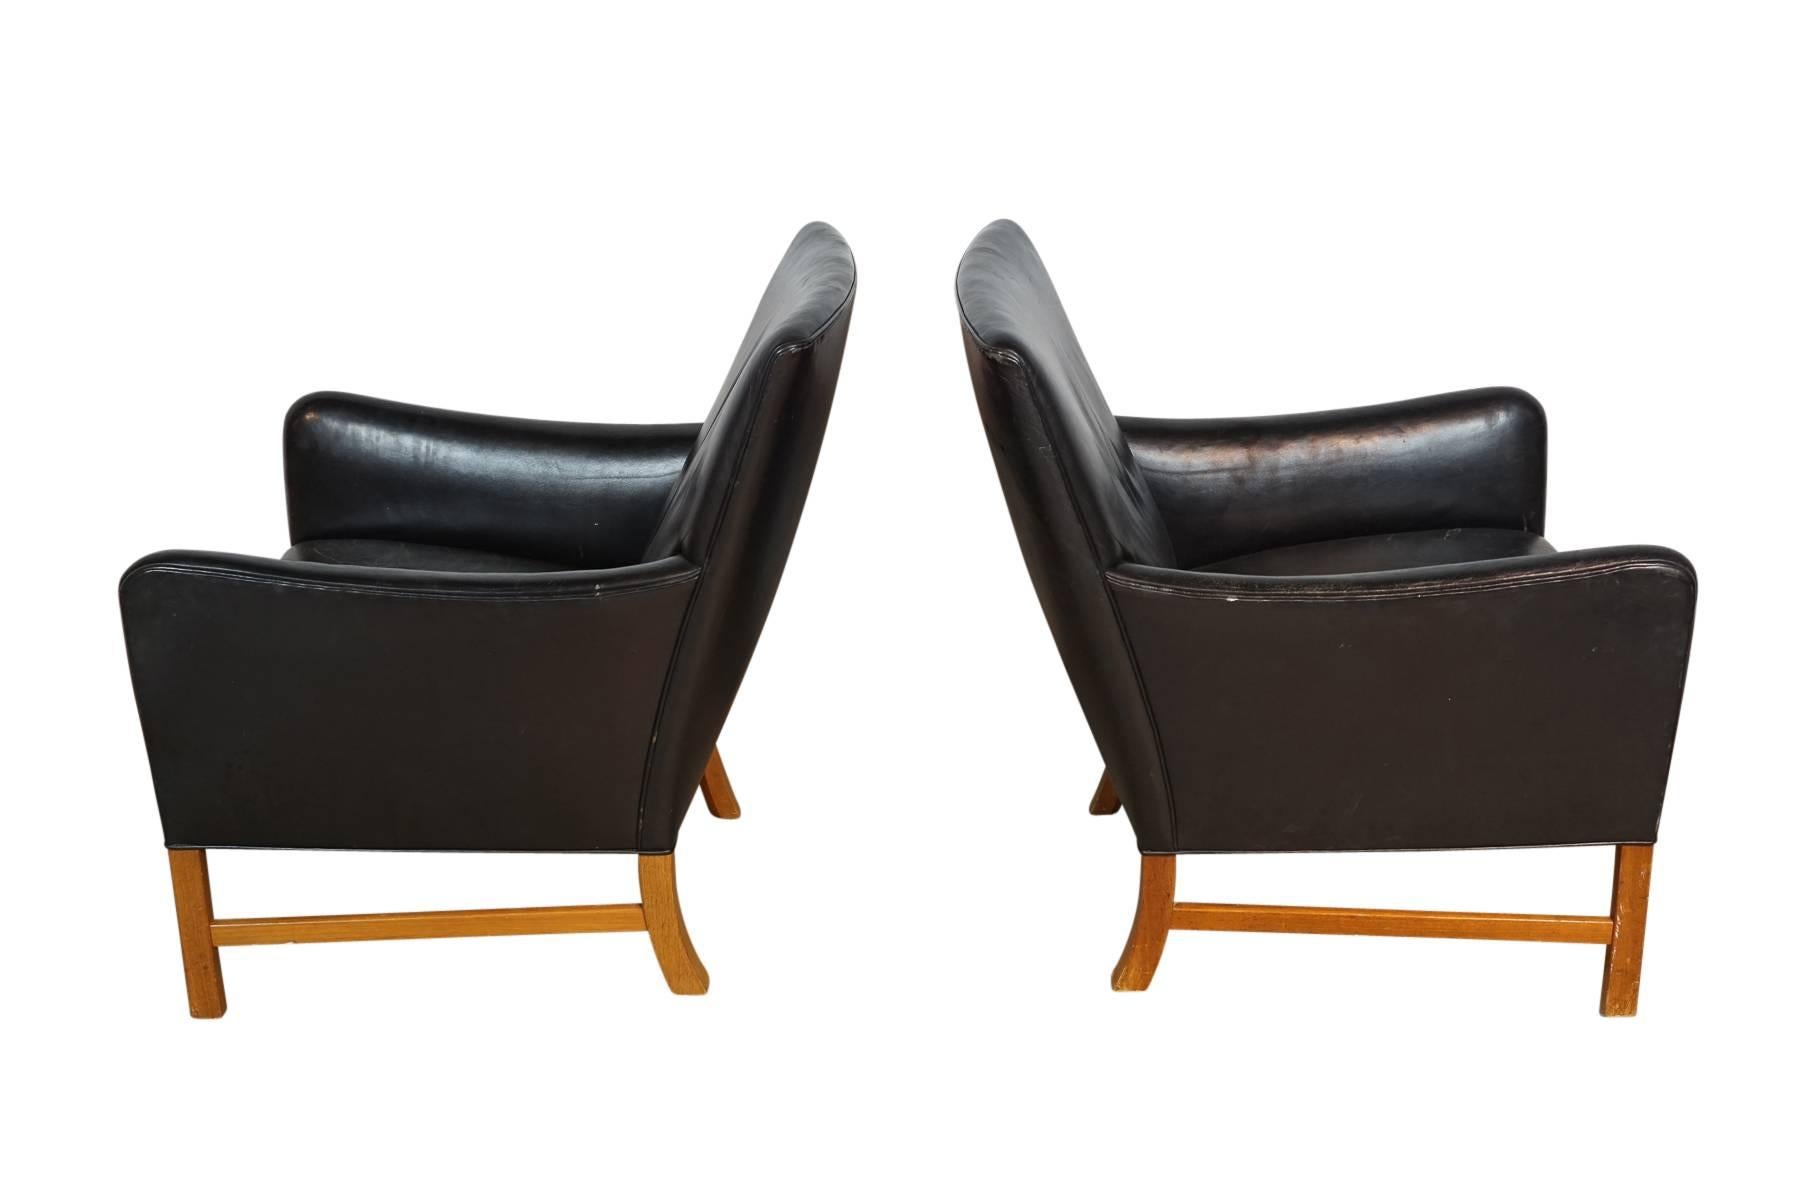 Superb pair of Ole Wanscher lounge chairs in original black leather on a solid mahogany frame. Produced by A.J. Iversen, Denmark.